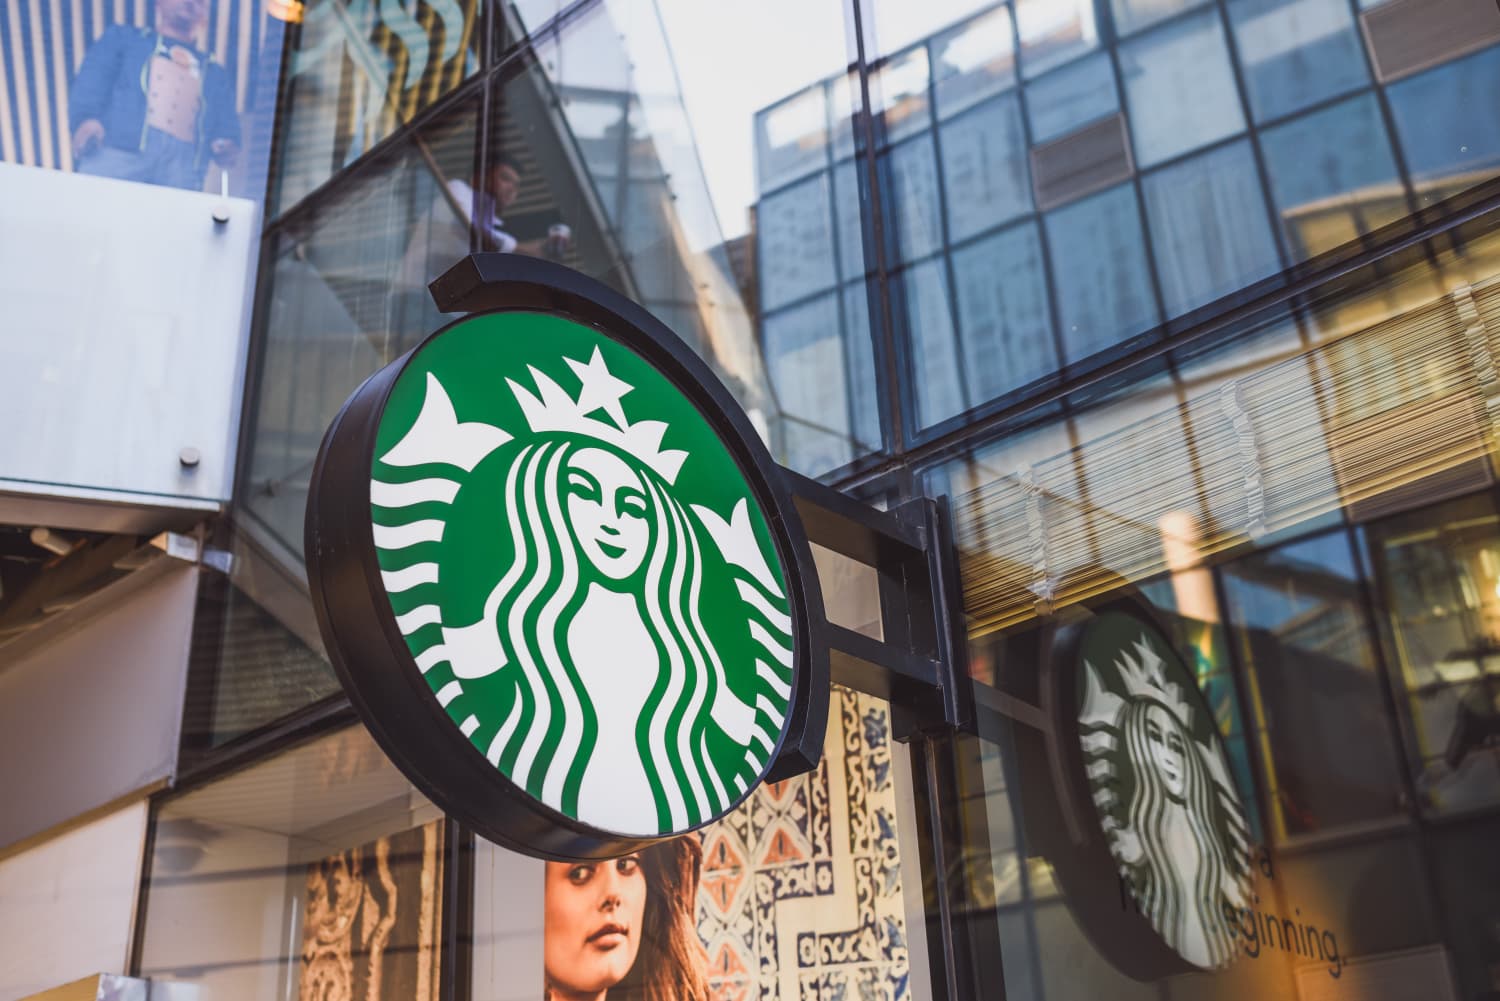 One Starbucks Barista Reveals the Worst Drinks He’s Ever Made